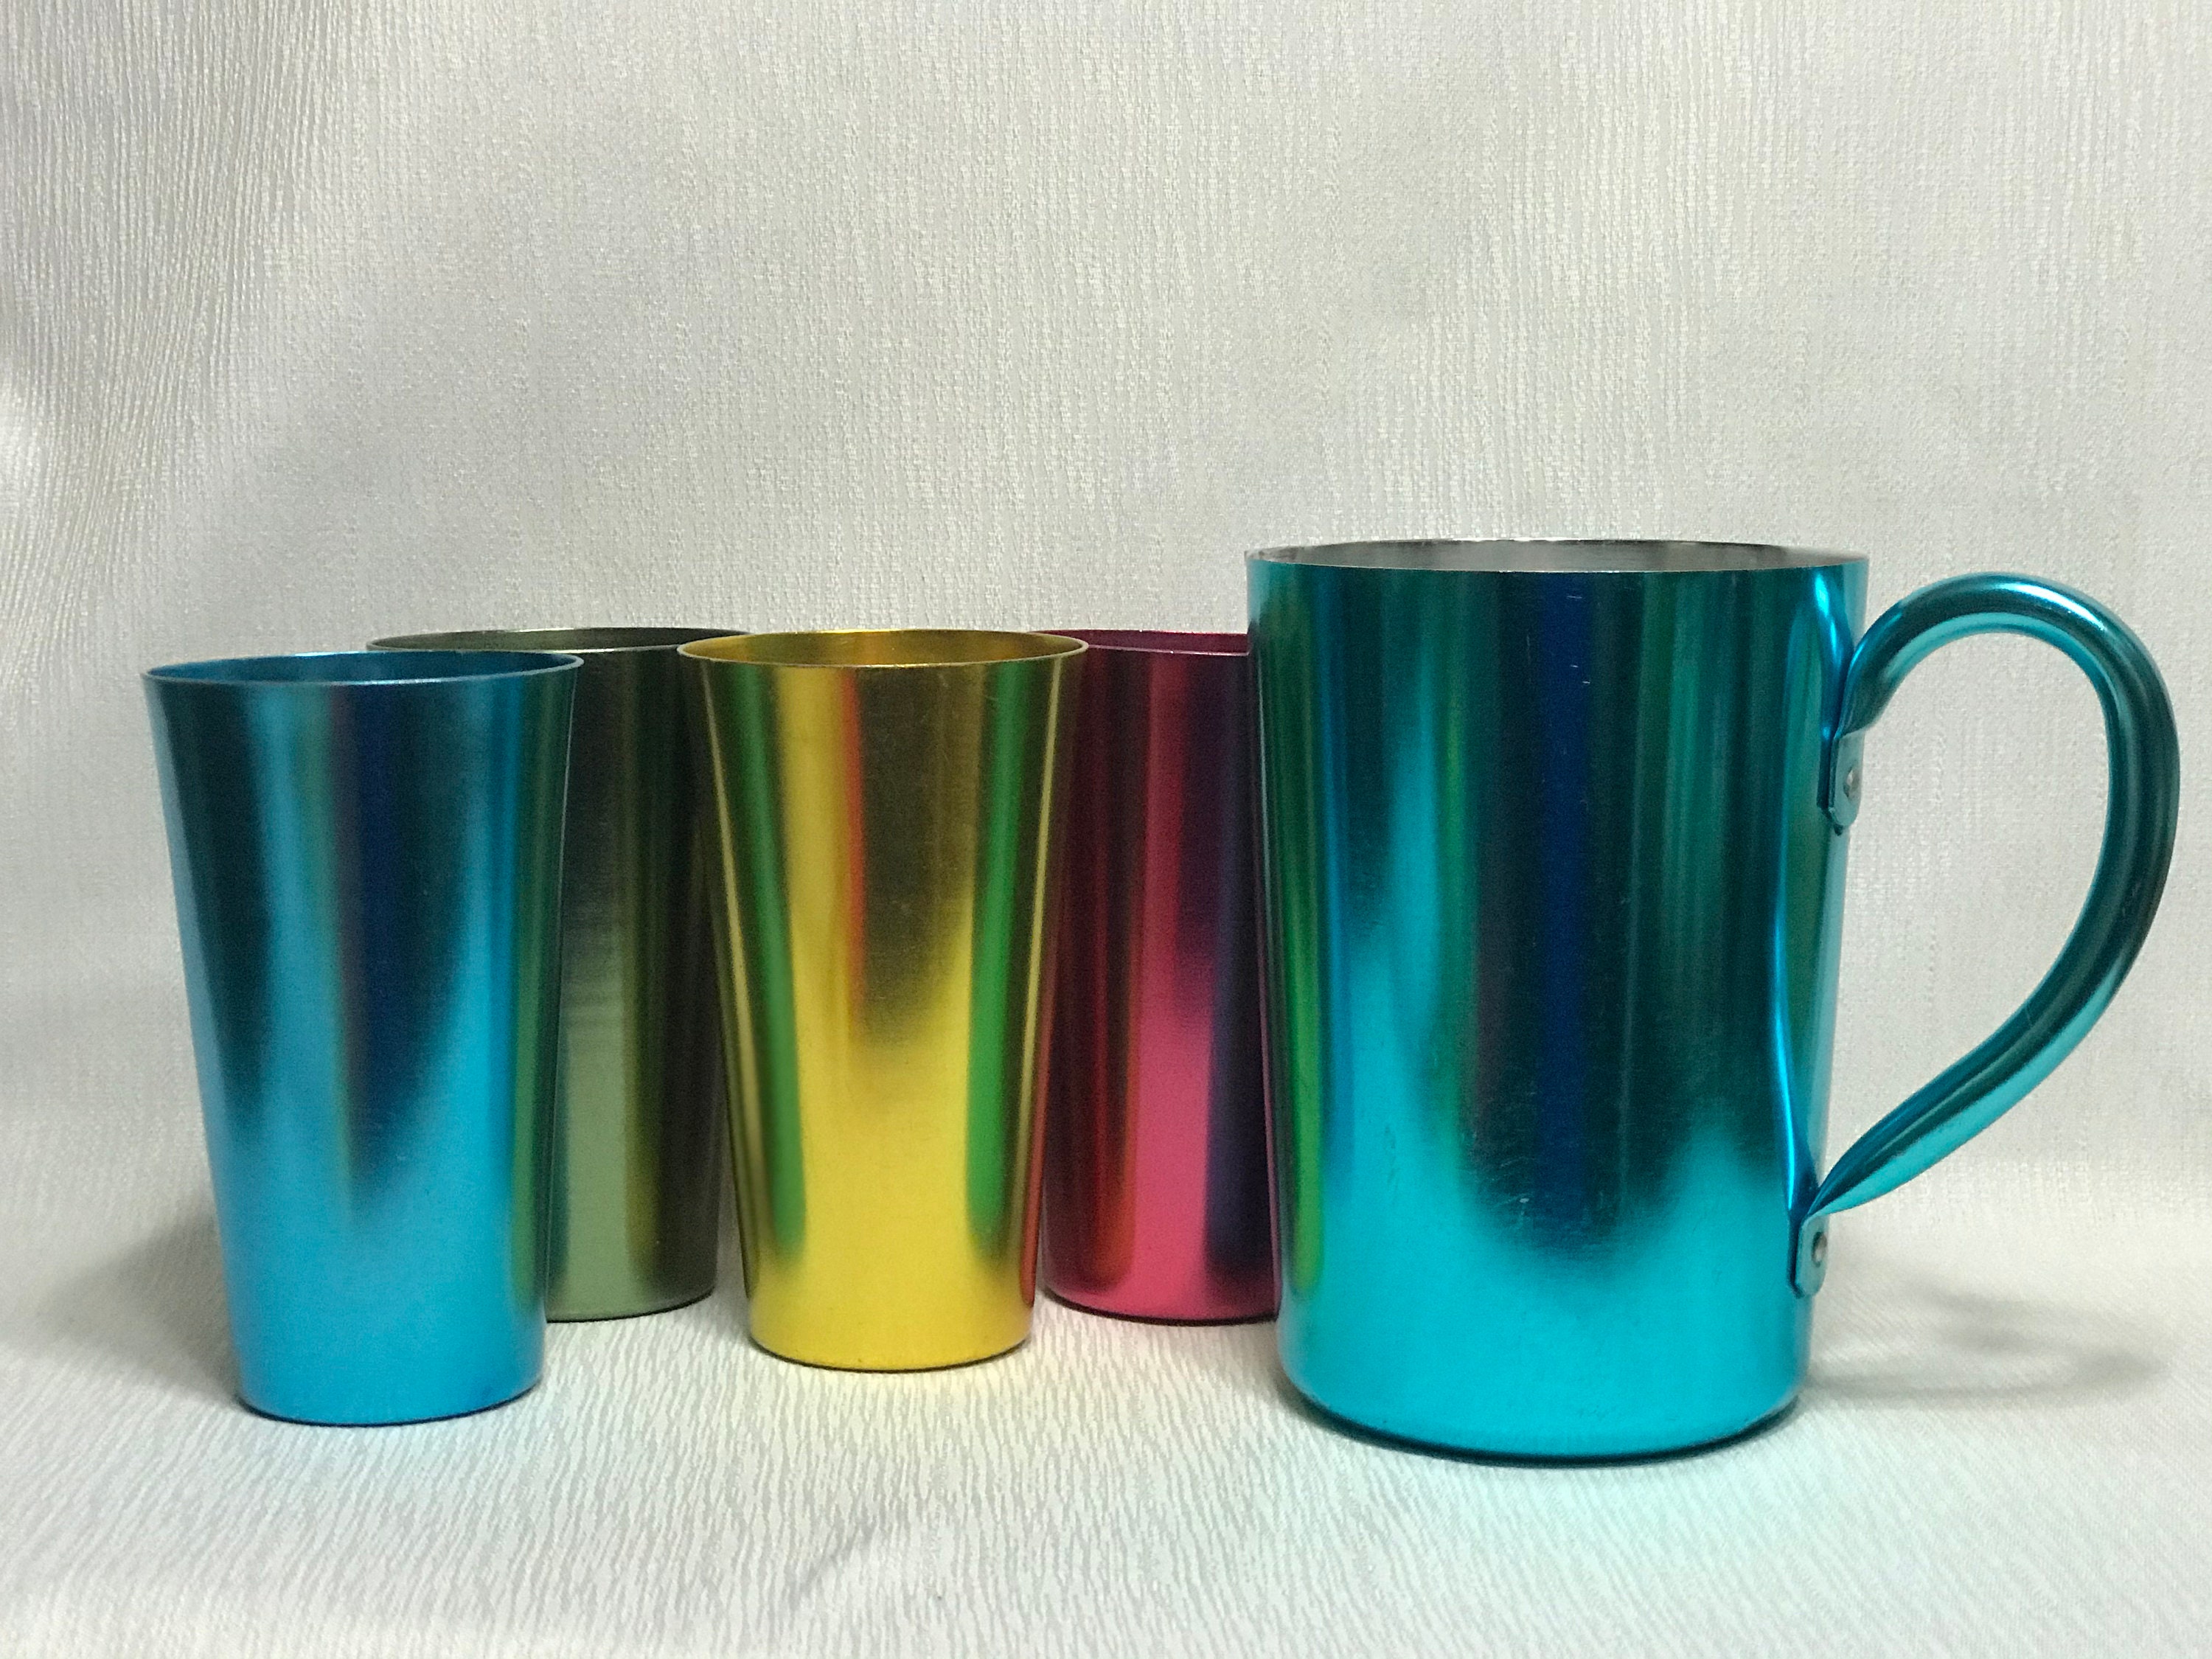 RVANest - Remember these? Set of 8 vintage aluminum tumblers and matching  pitcher. Perfect for your July 4th get-together. We're open all weekend  Saturday 10-5, Sunday 12-4 and Monday 11-5. Stop by